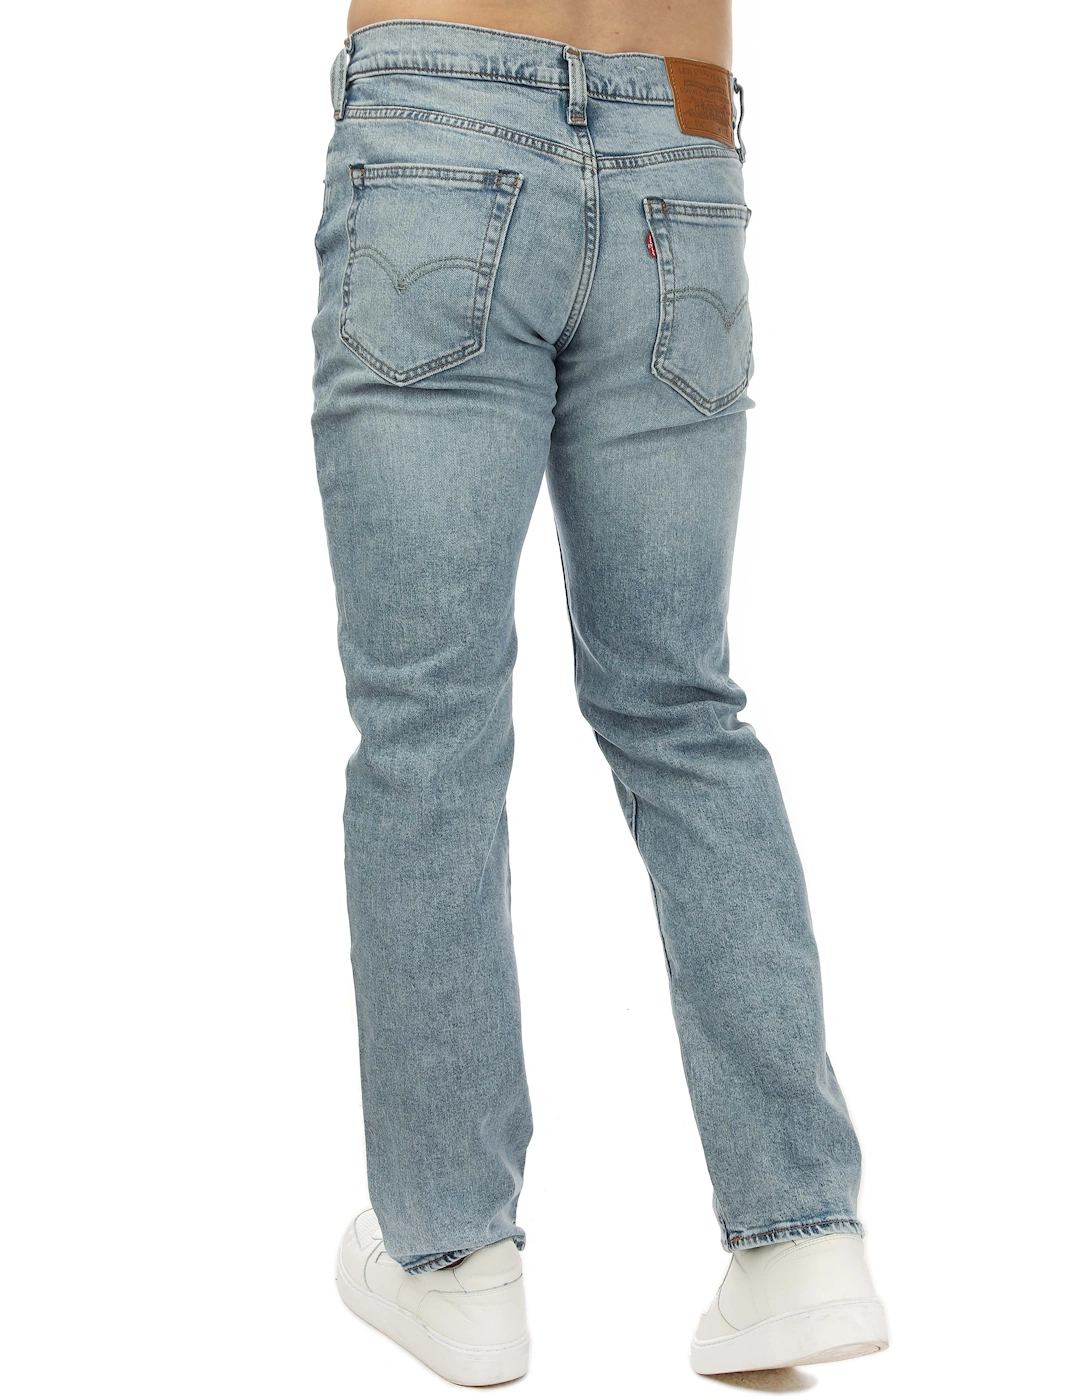 Mens 514 Straight Up Town Jeans